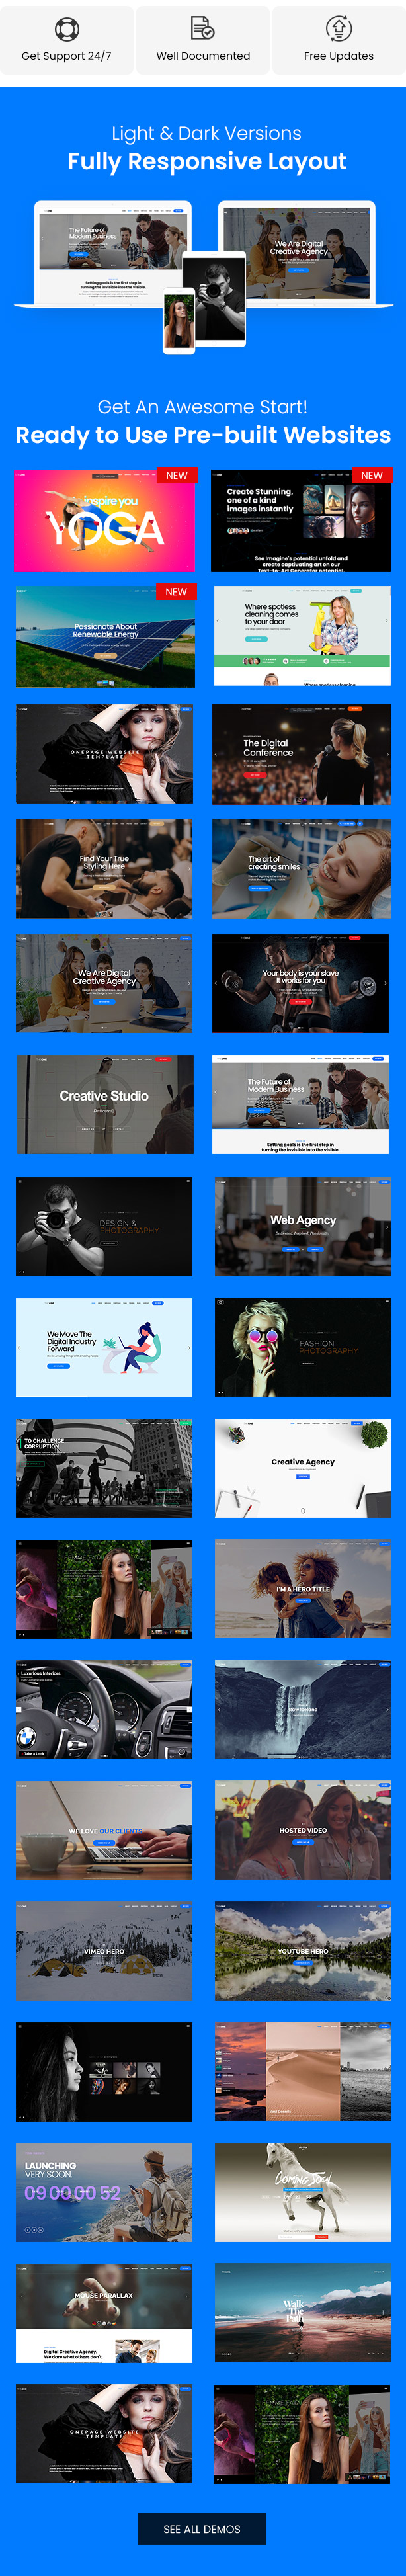 This One - One Page Responsive Website Template - 1